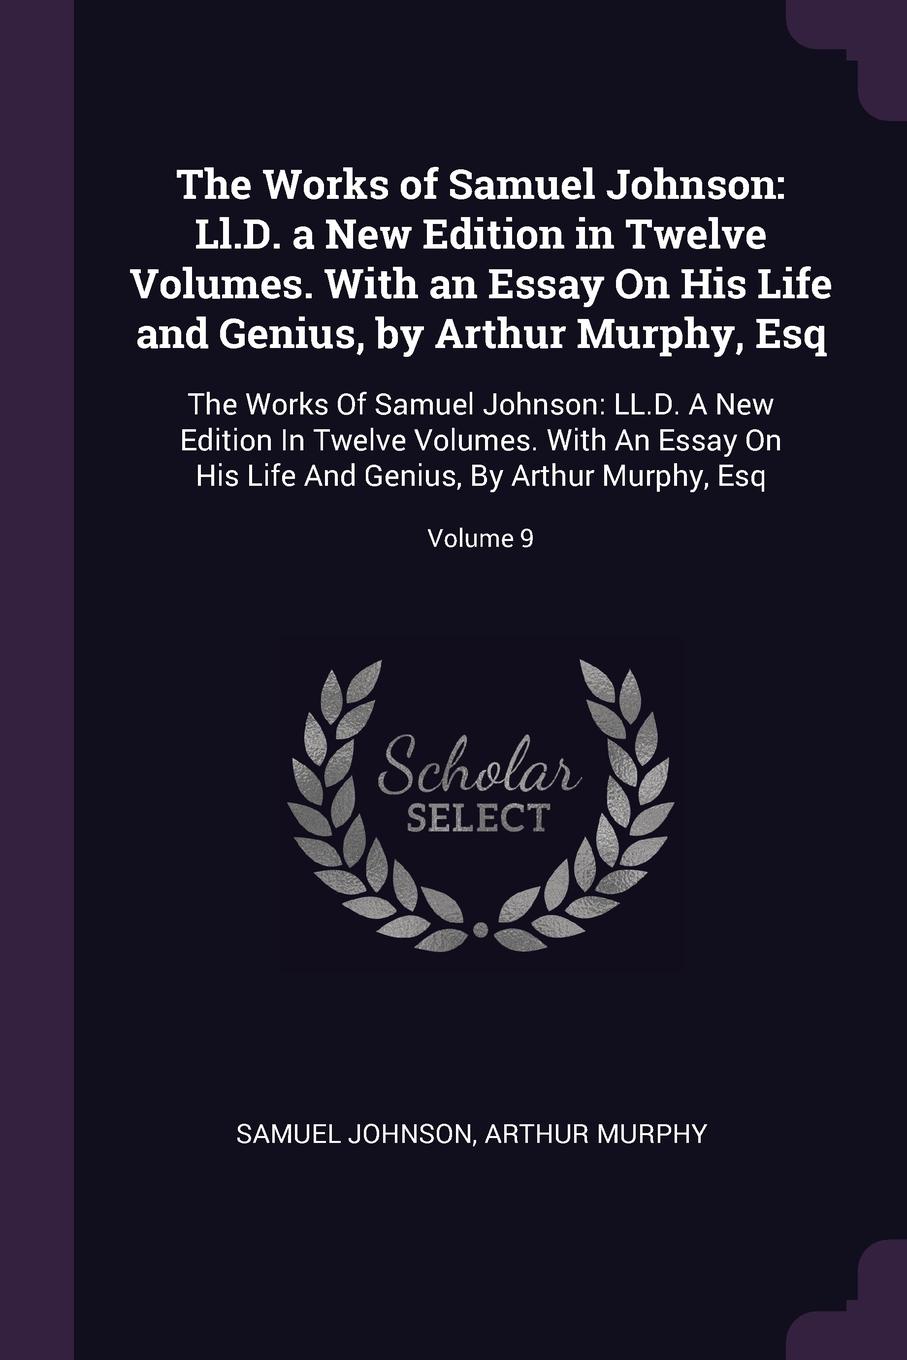 The Works of Samuel Johnson. Ll.D. a New Edition in Twelve Volumes. With an Essay On His Life and Genius, by Arthur Murphy, Esq: The Works Of Samuel Johnson: LL.D. A New Edition In Twelve Volumes. With An Essay On His Life And Genius, By Arthur Mu...